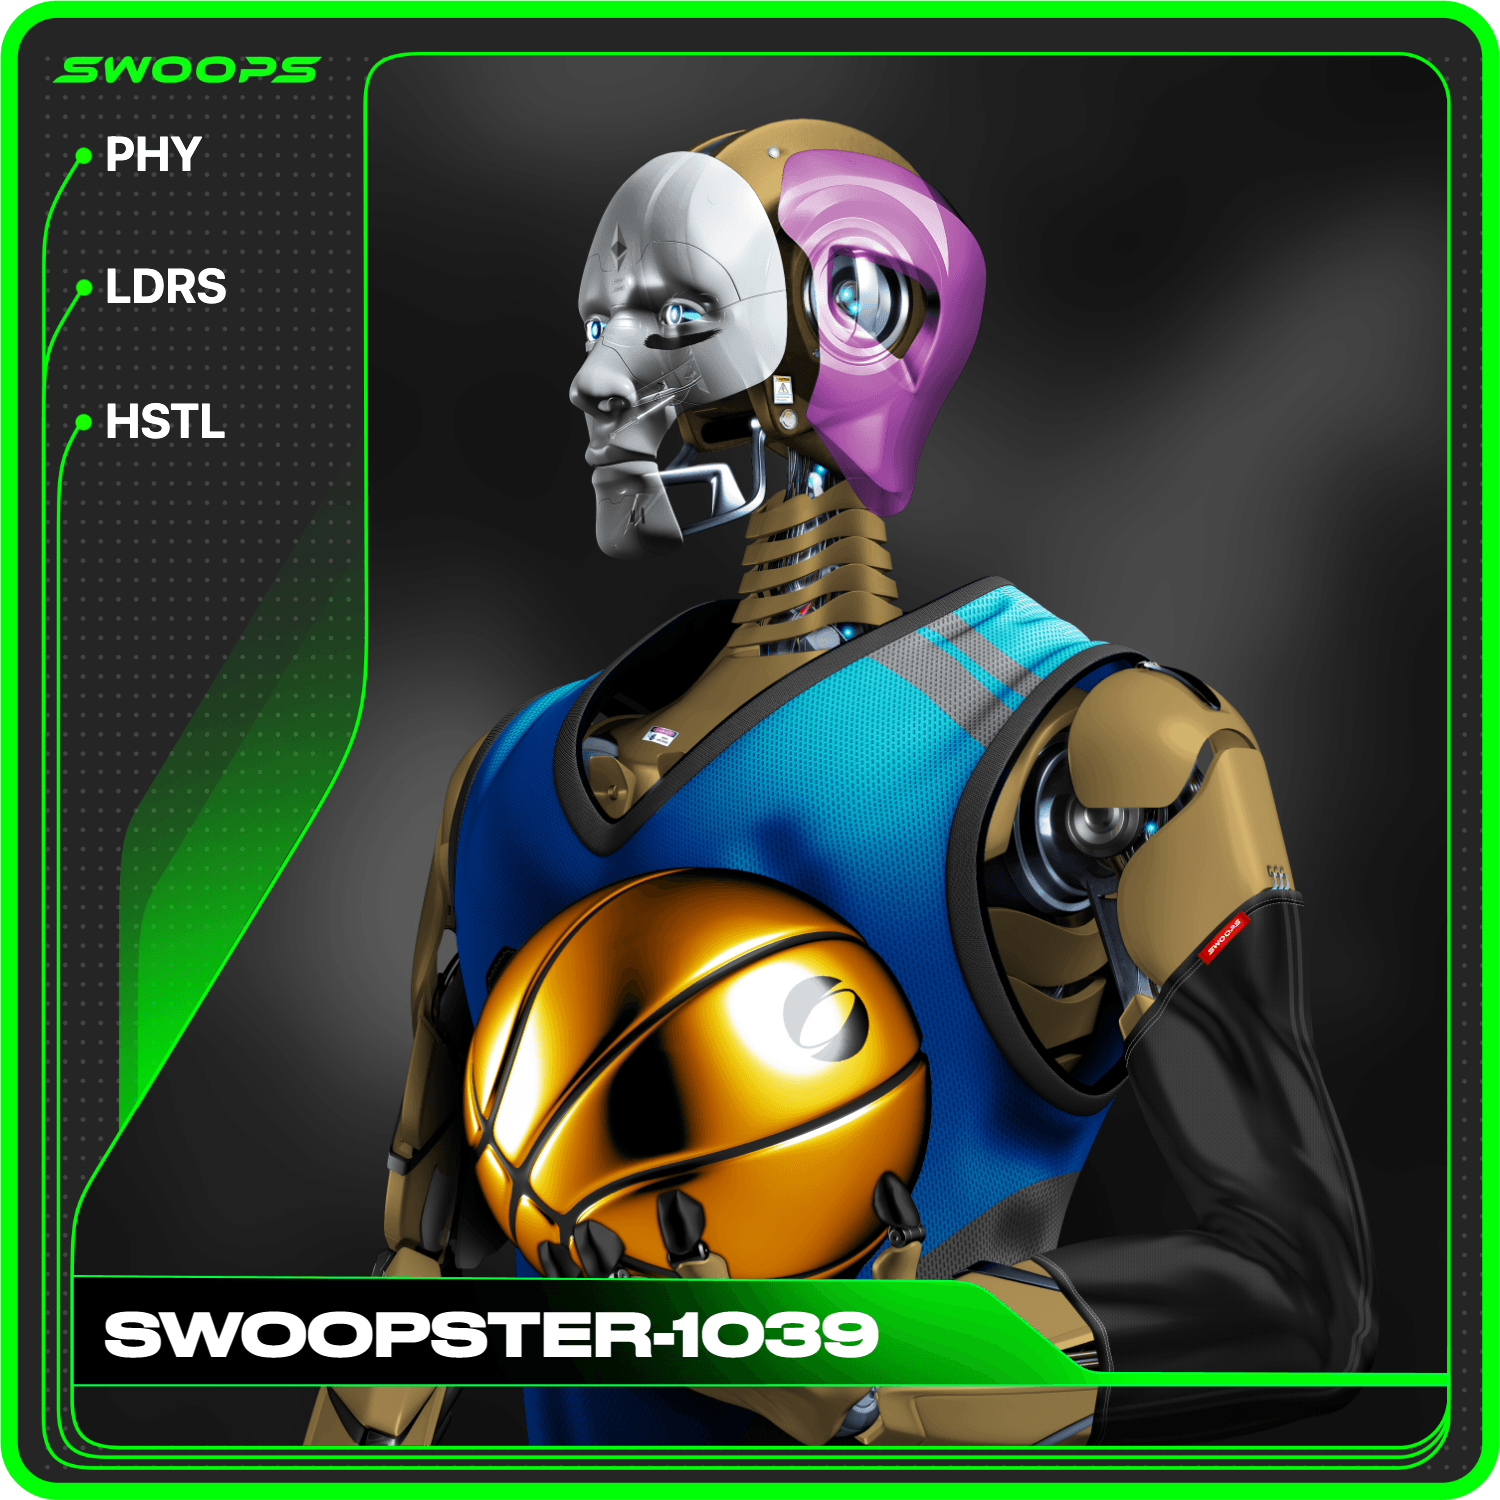 SWOOPSTER-1039